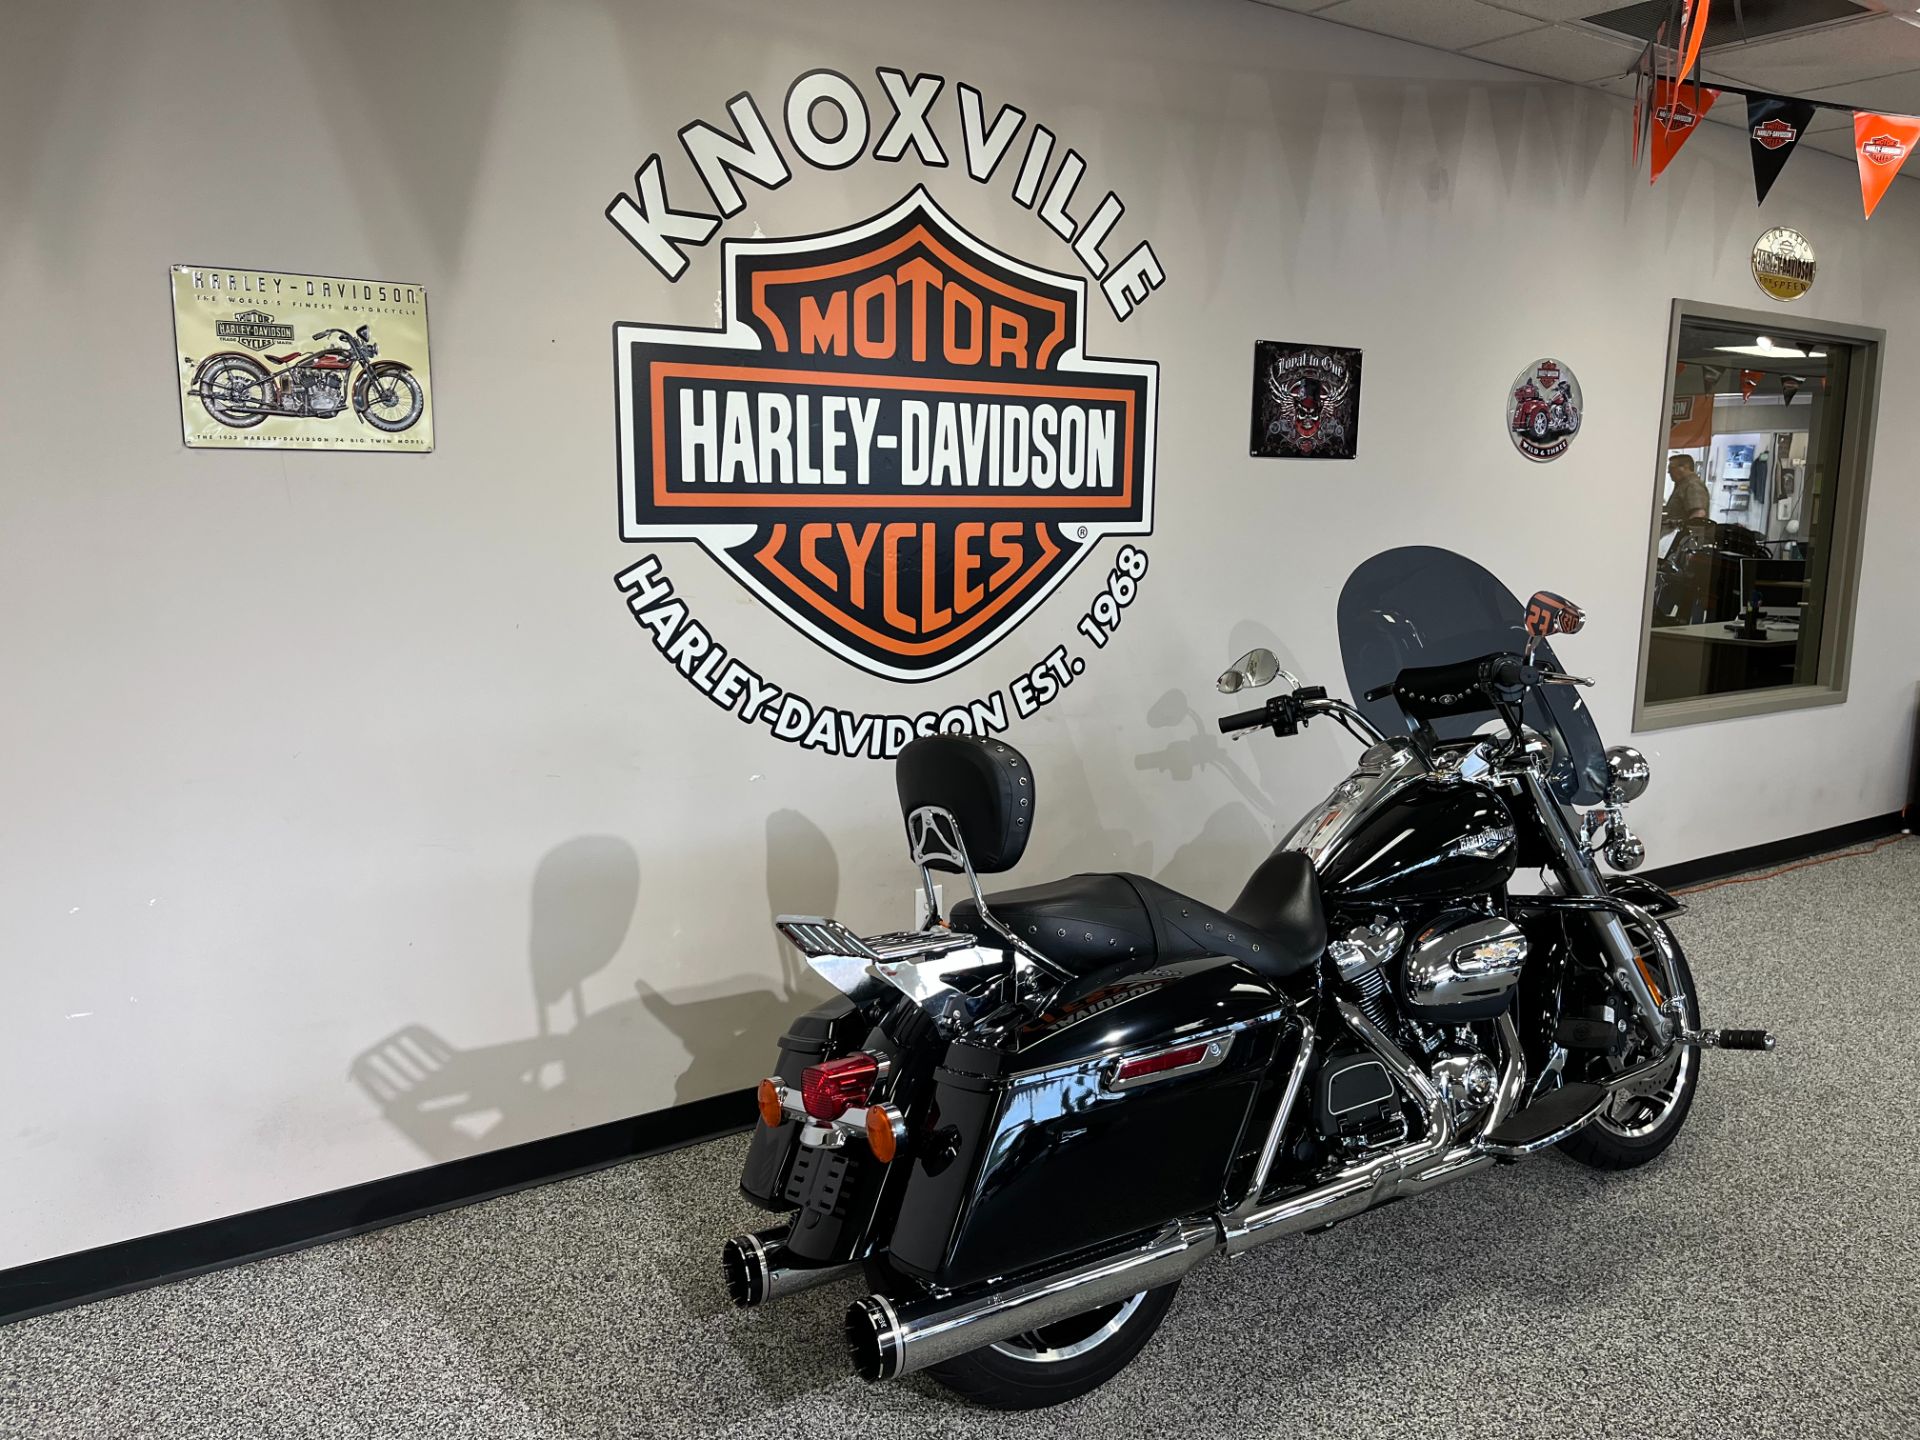 2020 Harley-Davidson ROAD KING in Knoxville, Tennessee - Photo 2